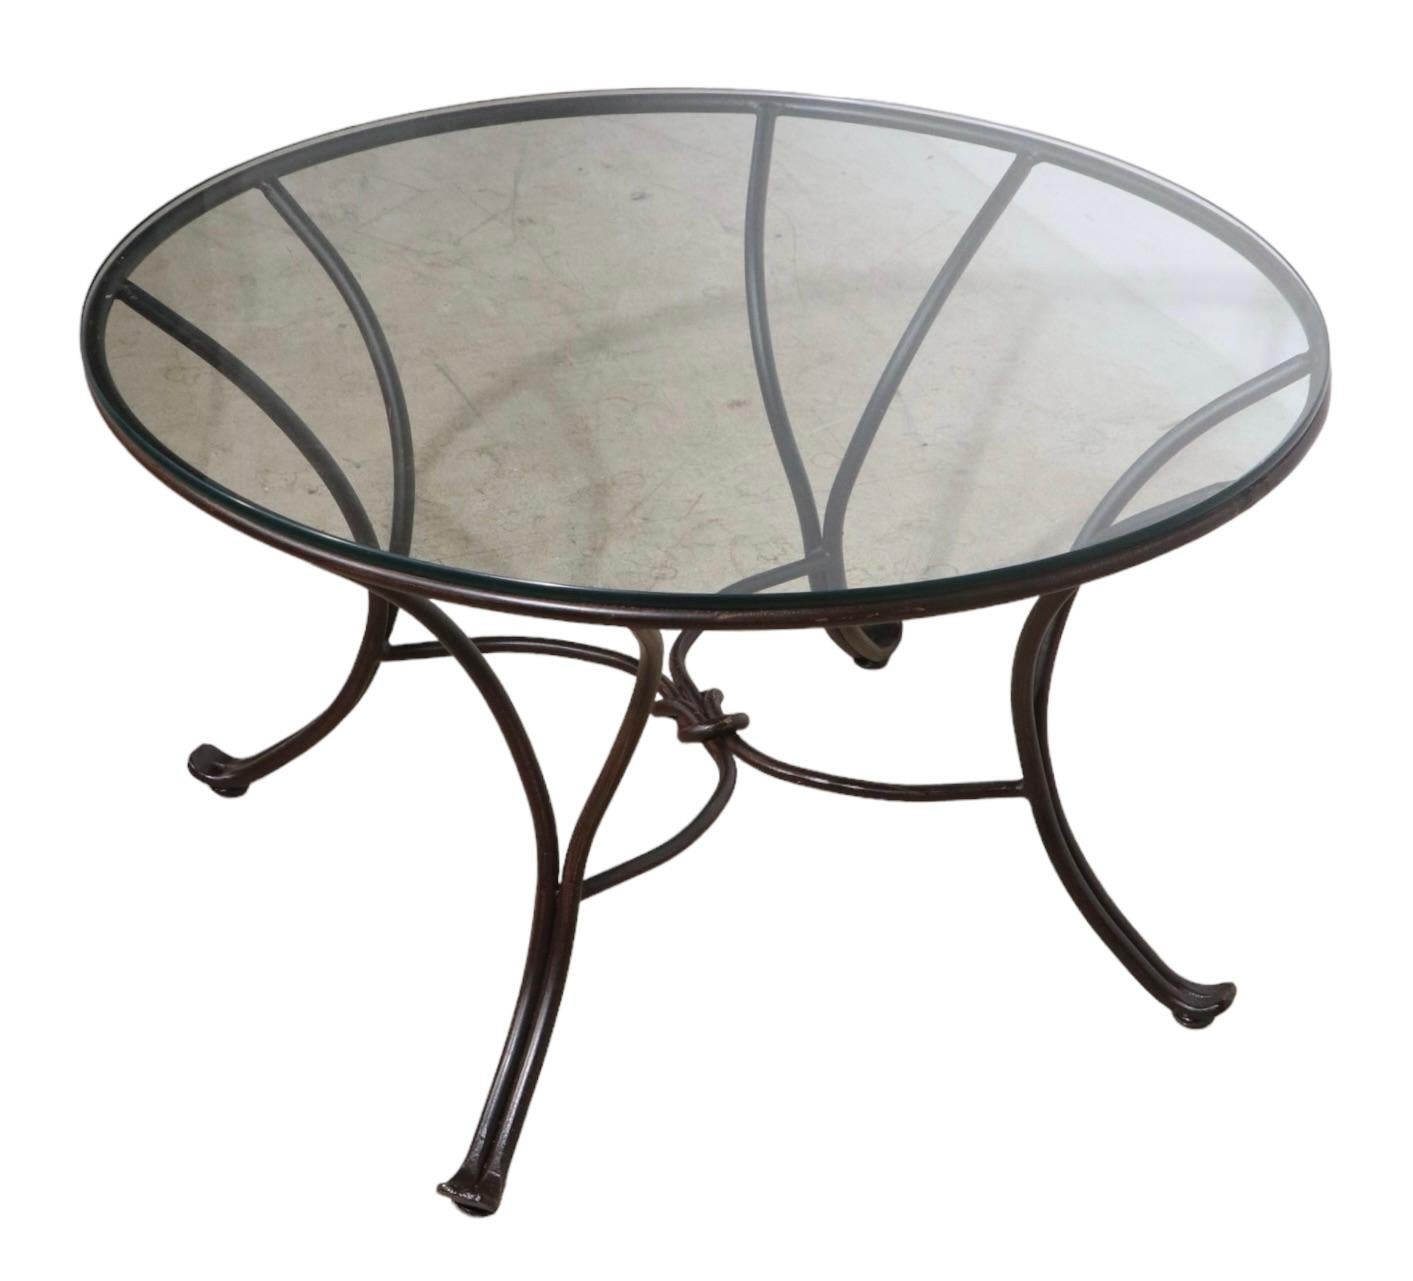 Art Deco Wrought Iron and Glass Coffee Table